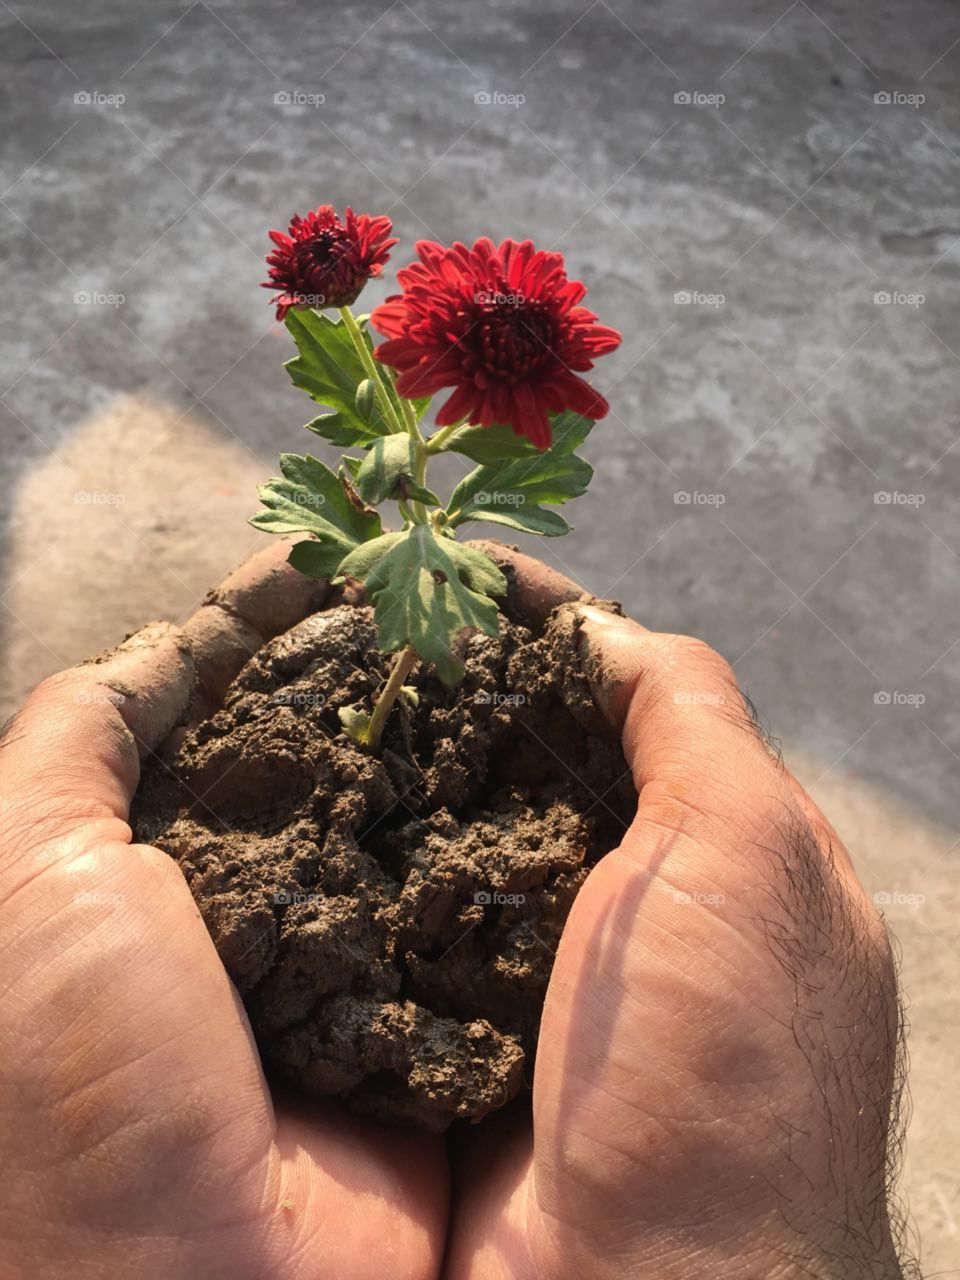 Soil, Flower, No Person, Ball Shaped, Growth